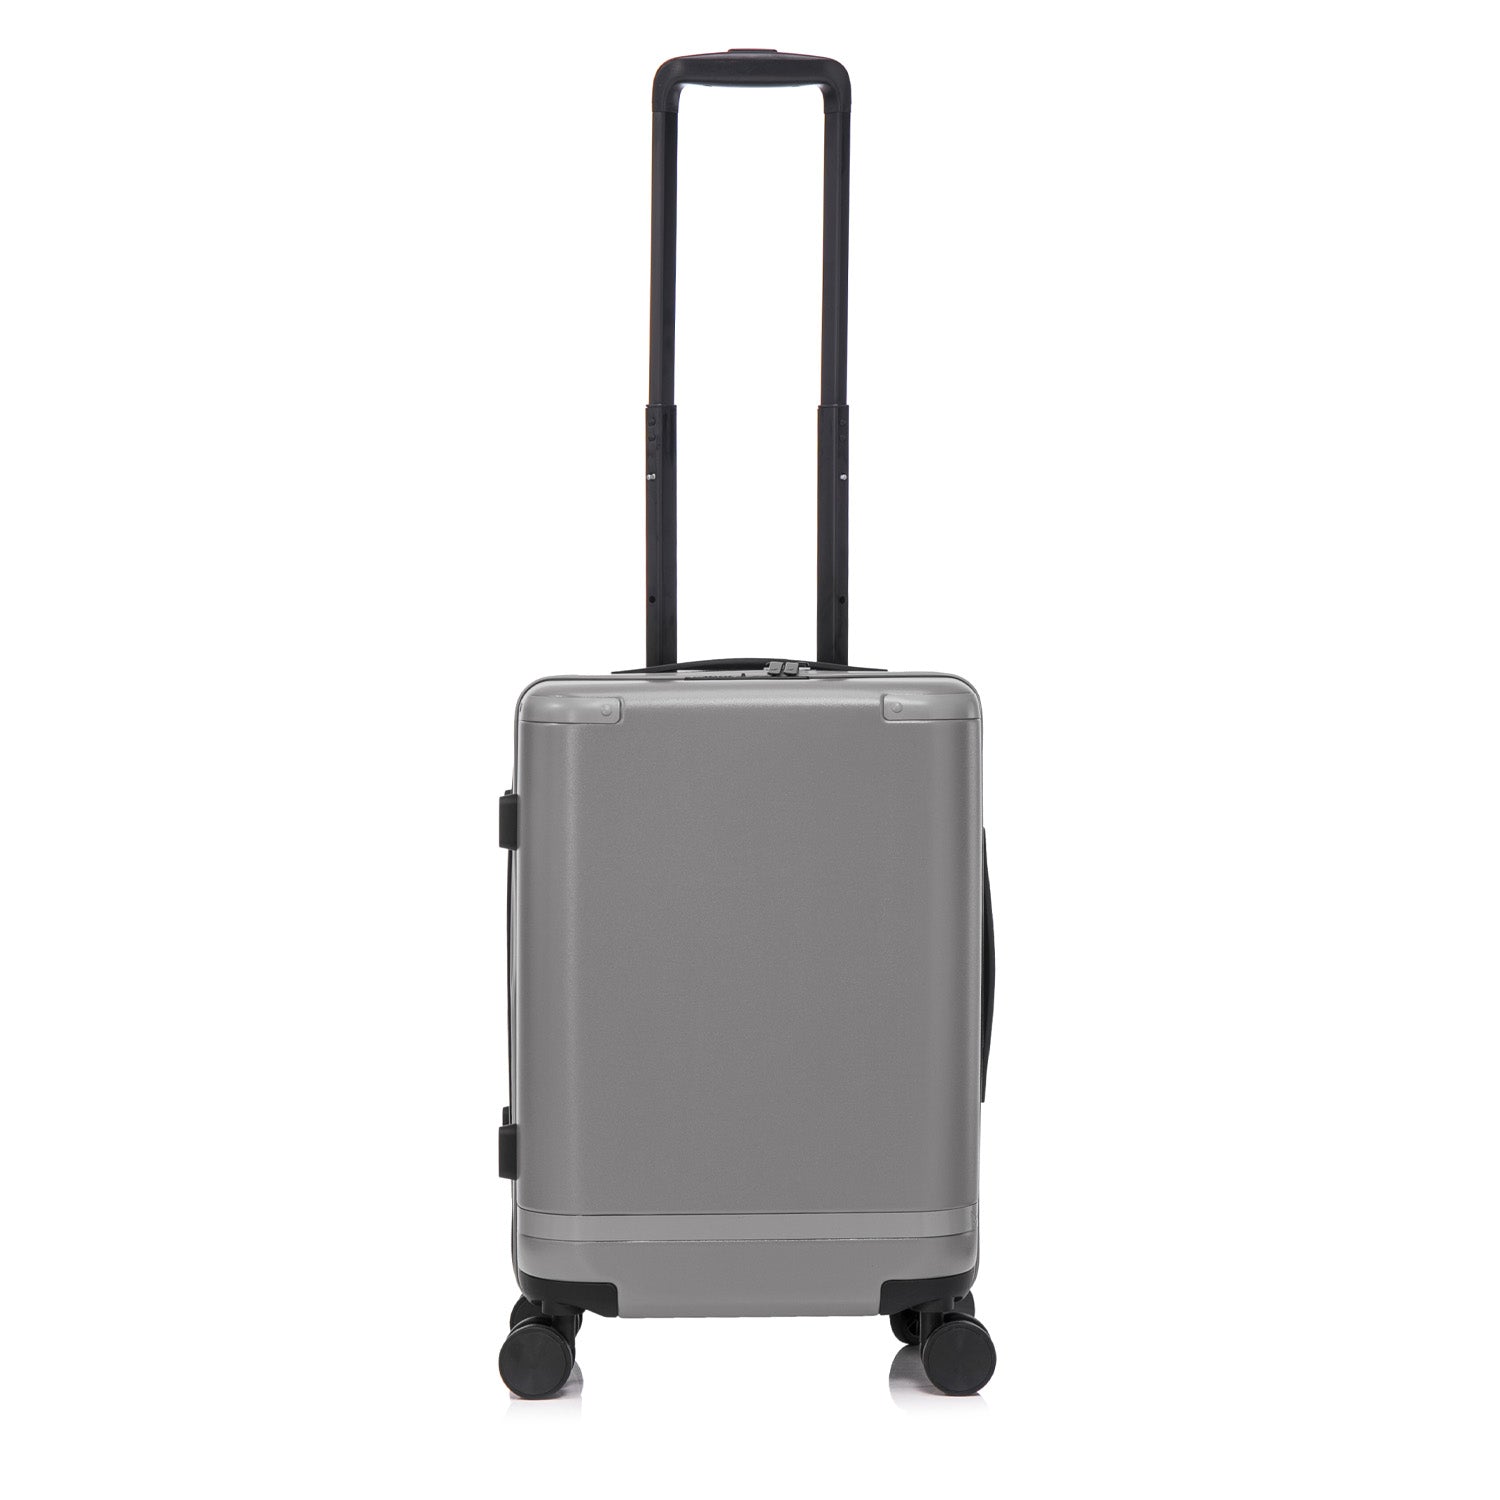 Qantas- QF250 ROME 56cm Small cabin spinner suitcase - Charcoal-1